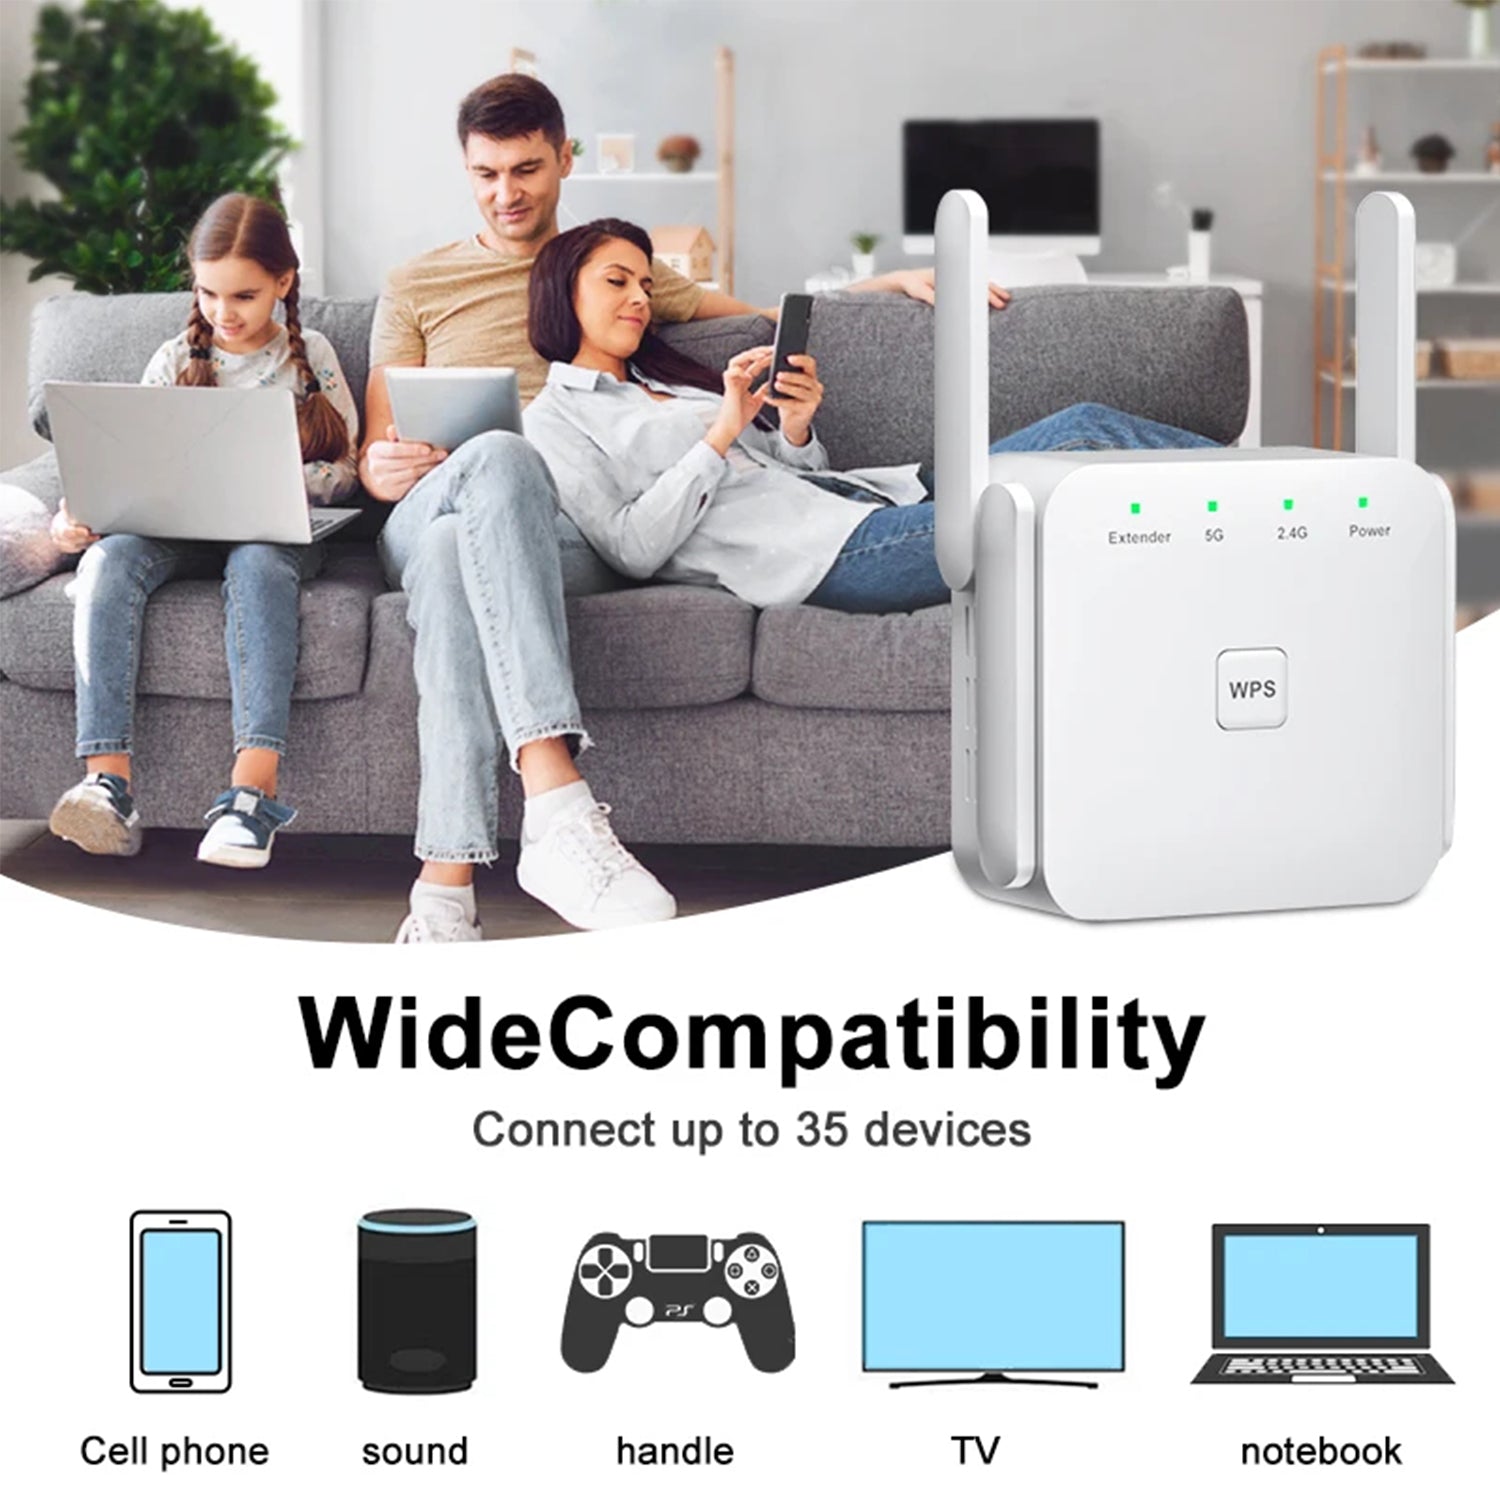 WiFi Extender 5G 1200Mbps Wi-Fi Signal Booster Amplifier for Home WiFi 2.4GHz Dual Band Wireless Repeater with Strong,4 Antennas 360° Coverage with Ethernet Port AP Mode